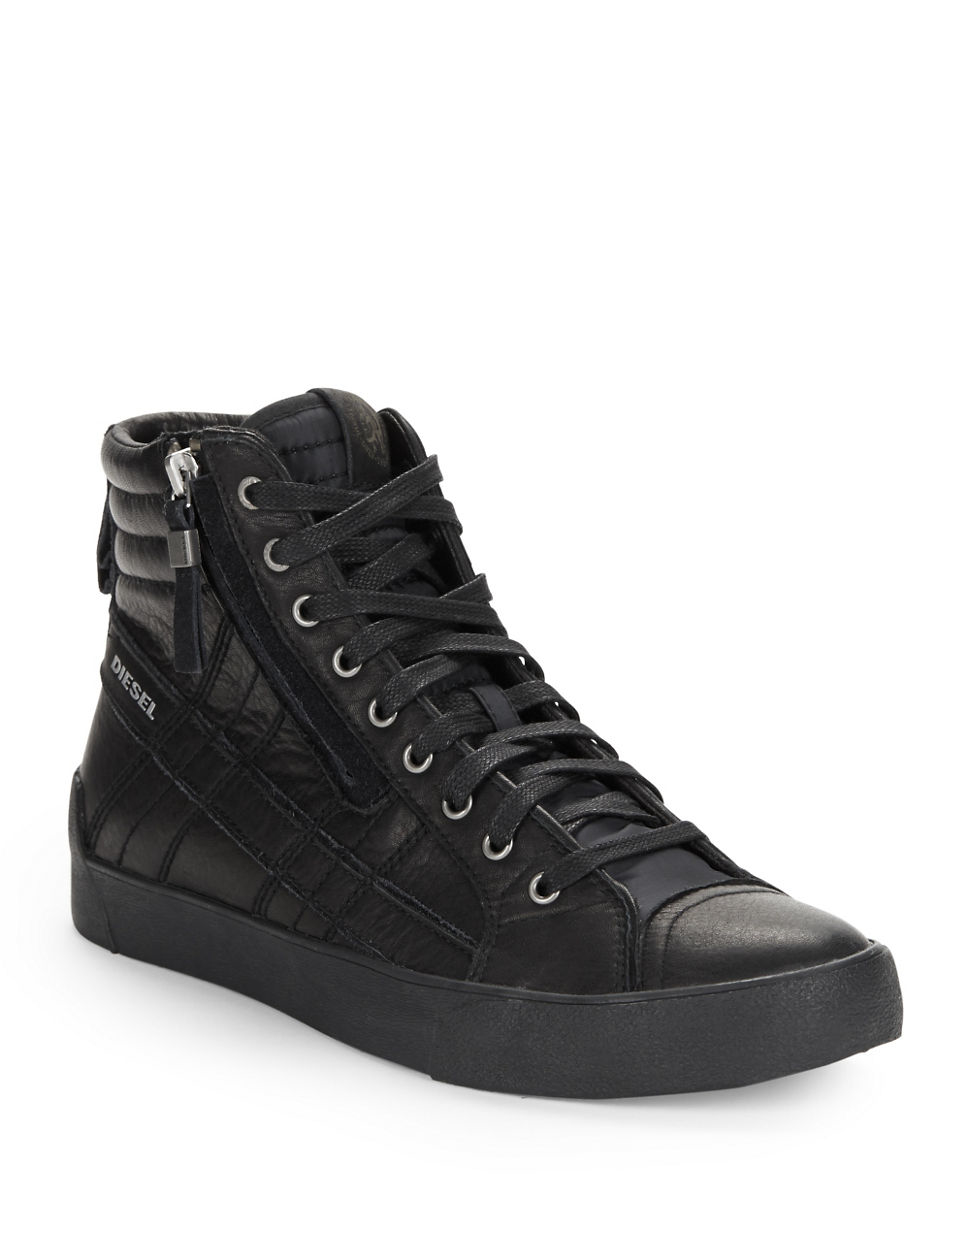 DIESEL Leather Lace-up Sneakers in Black for Men - Lyst